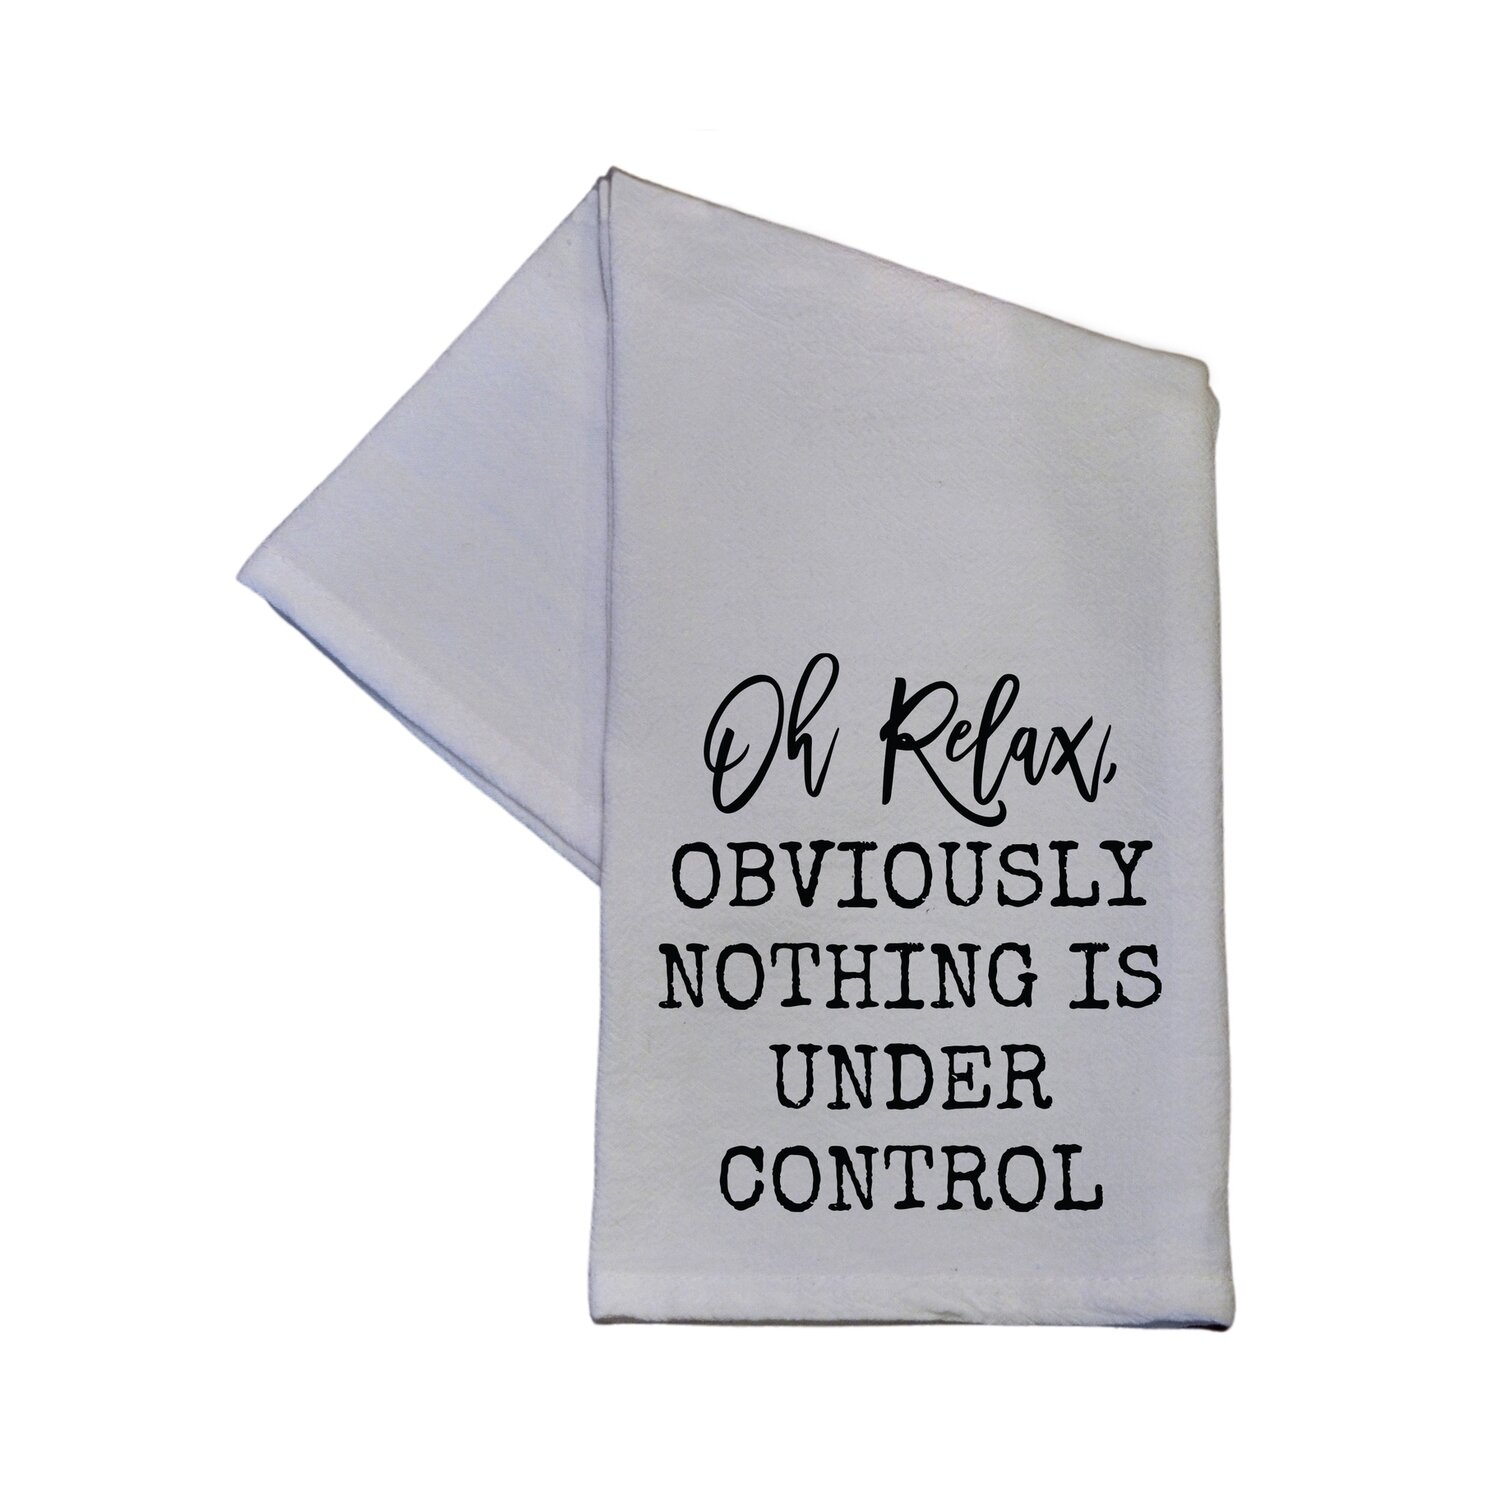 Oh Relax Obviously Nothing Is Under Control Hand Towel 16x24